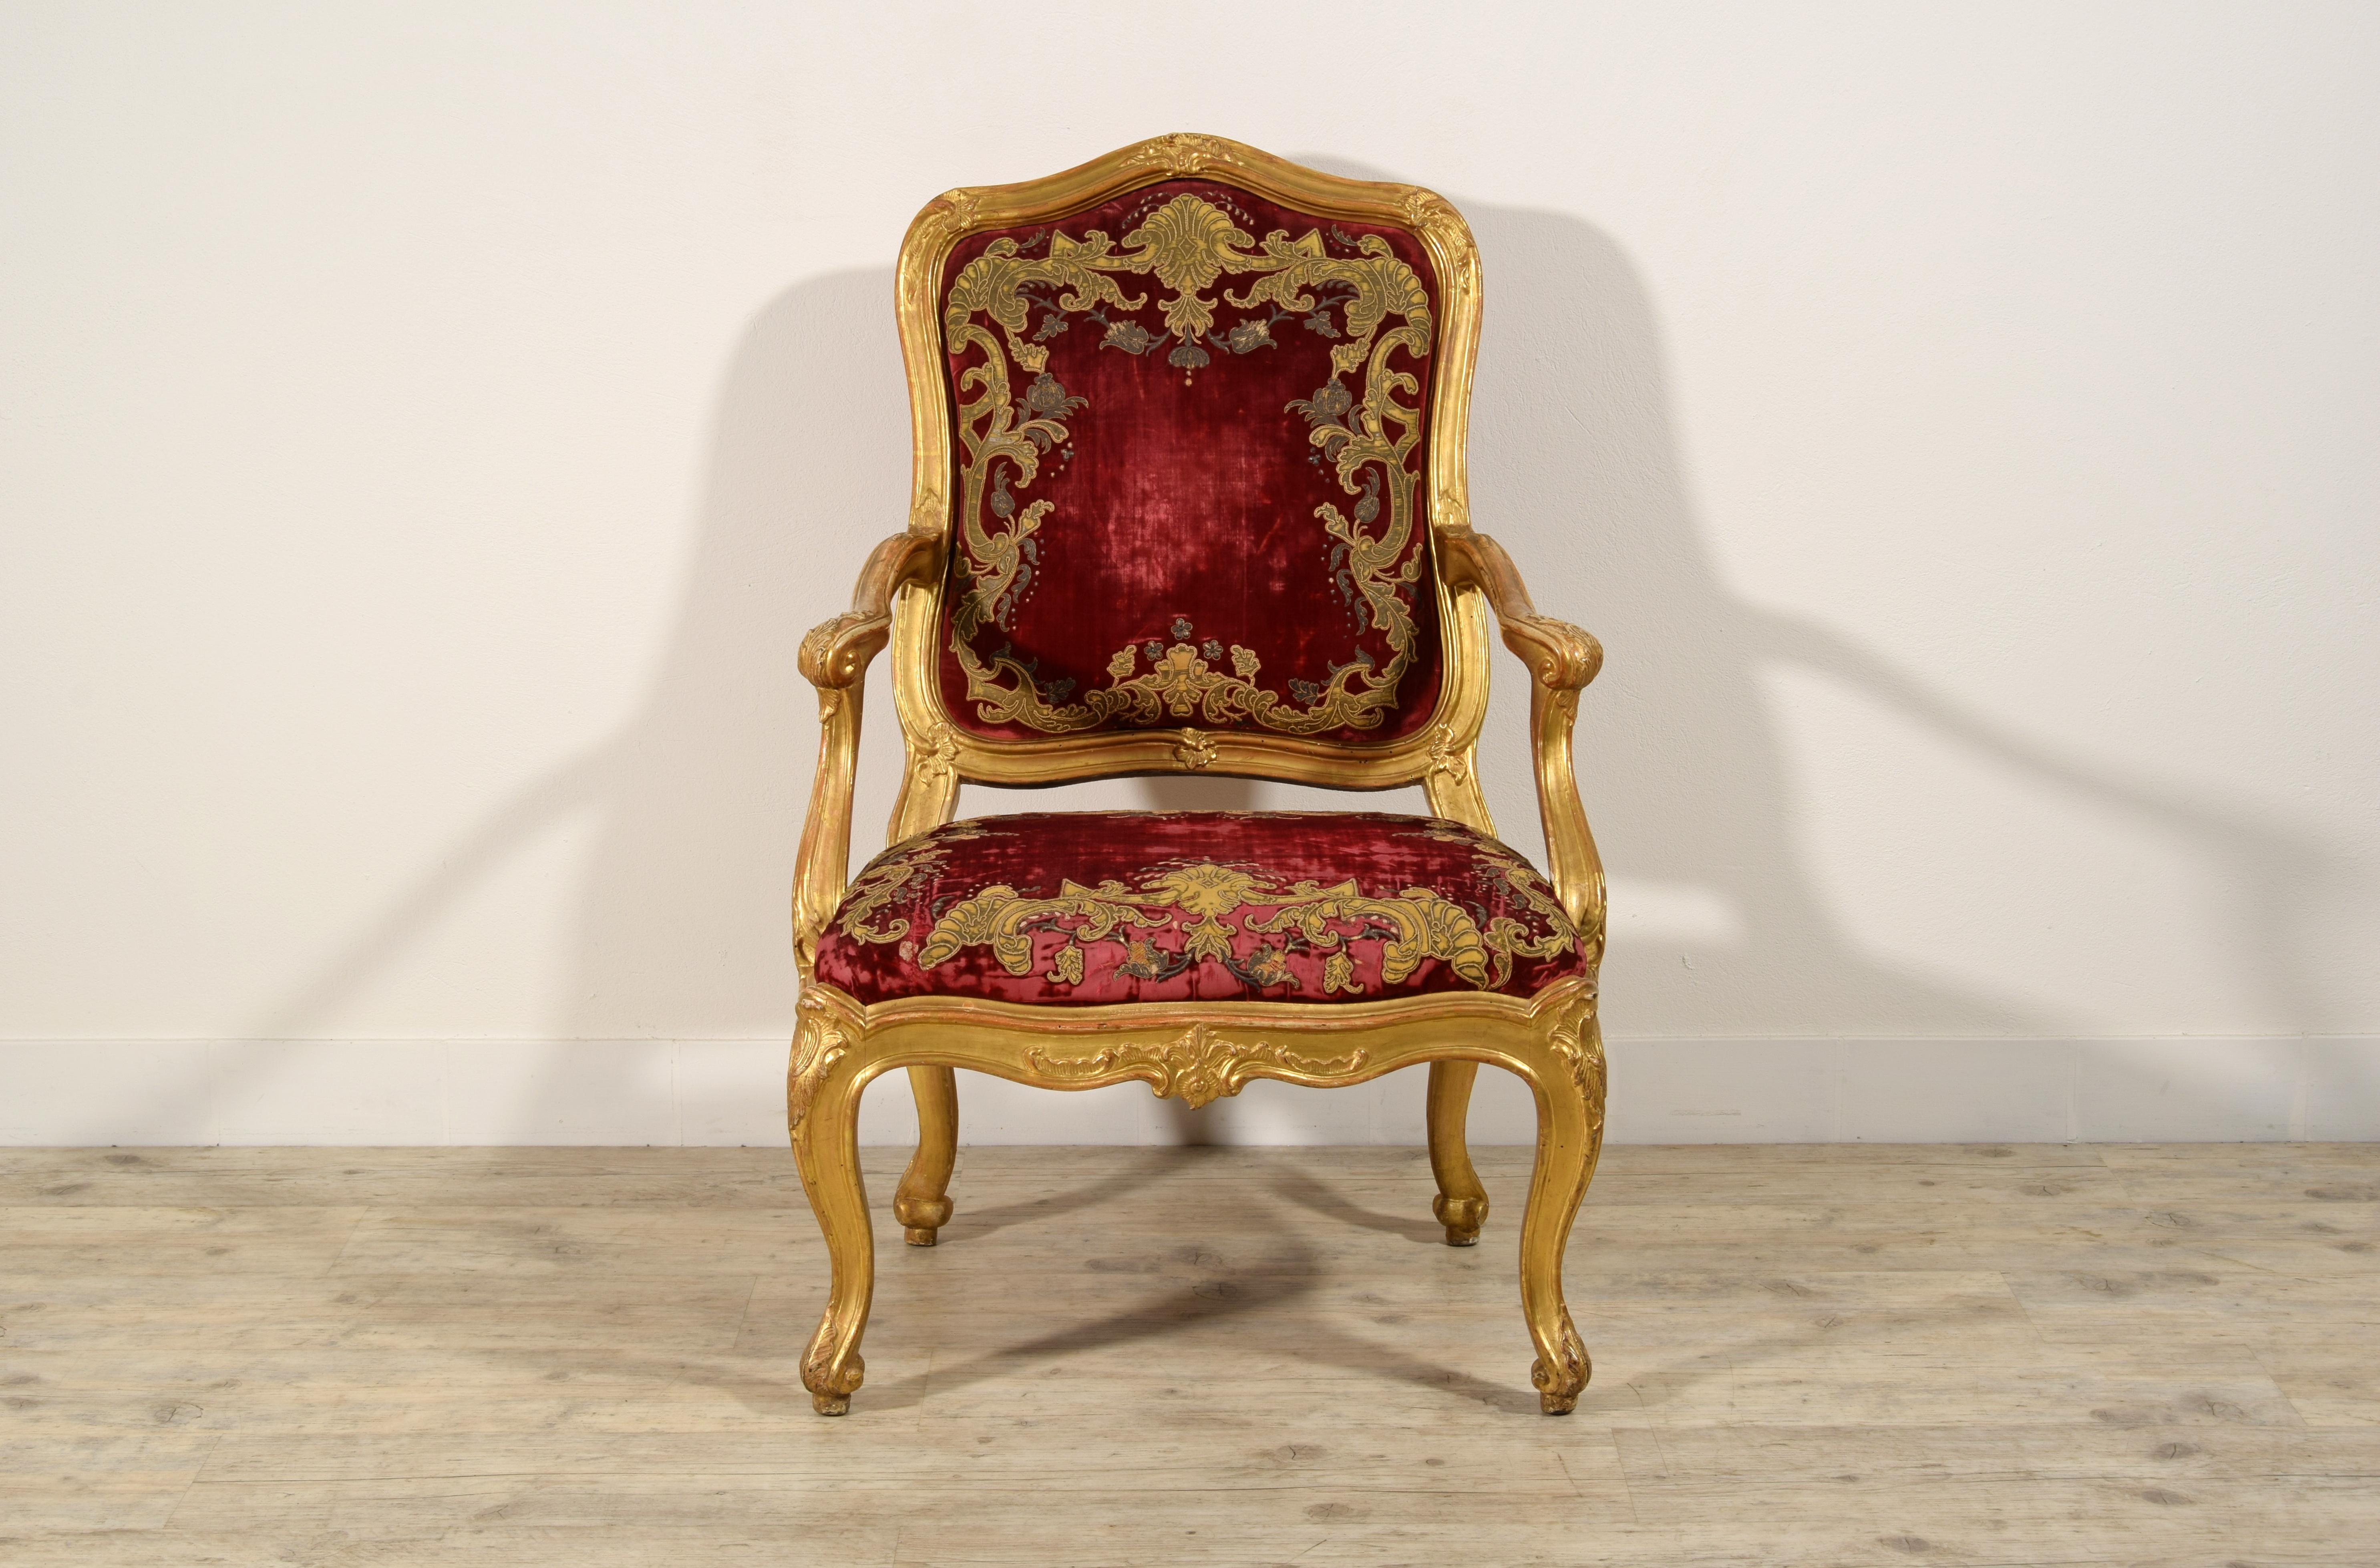 18th Century, Italian Louis XV Carved Giltwood Armchair
Measurements: cm H 108 x W 73 x D 77, seat H 46 x D 51 x W 61
The splendid large armchair, in finely carved and gilded wood, was made in Genoa, in the Louis XV period, mid-18th century. The